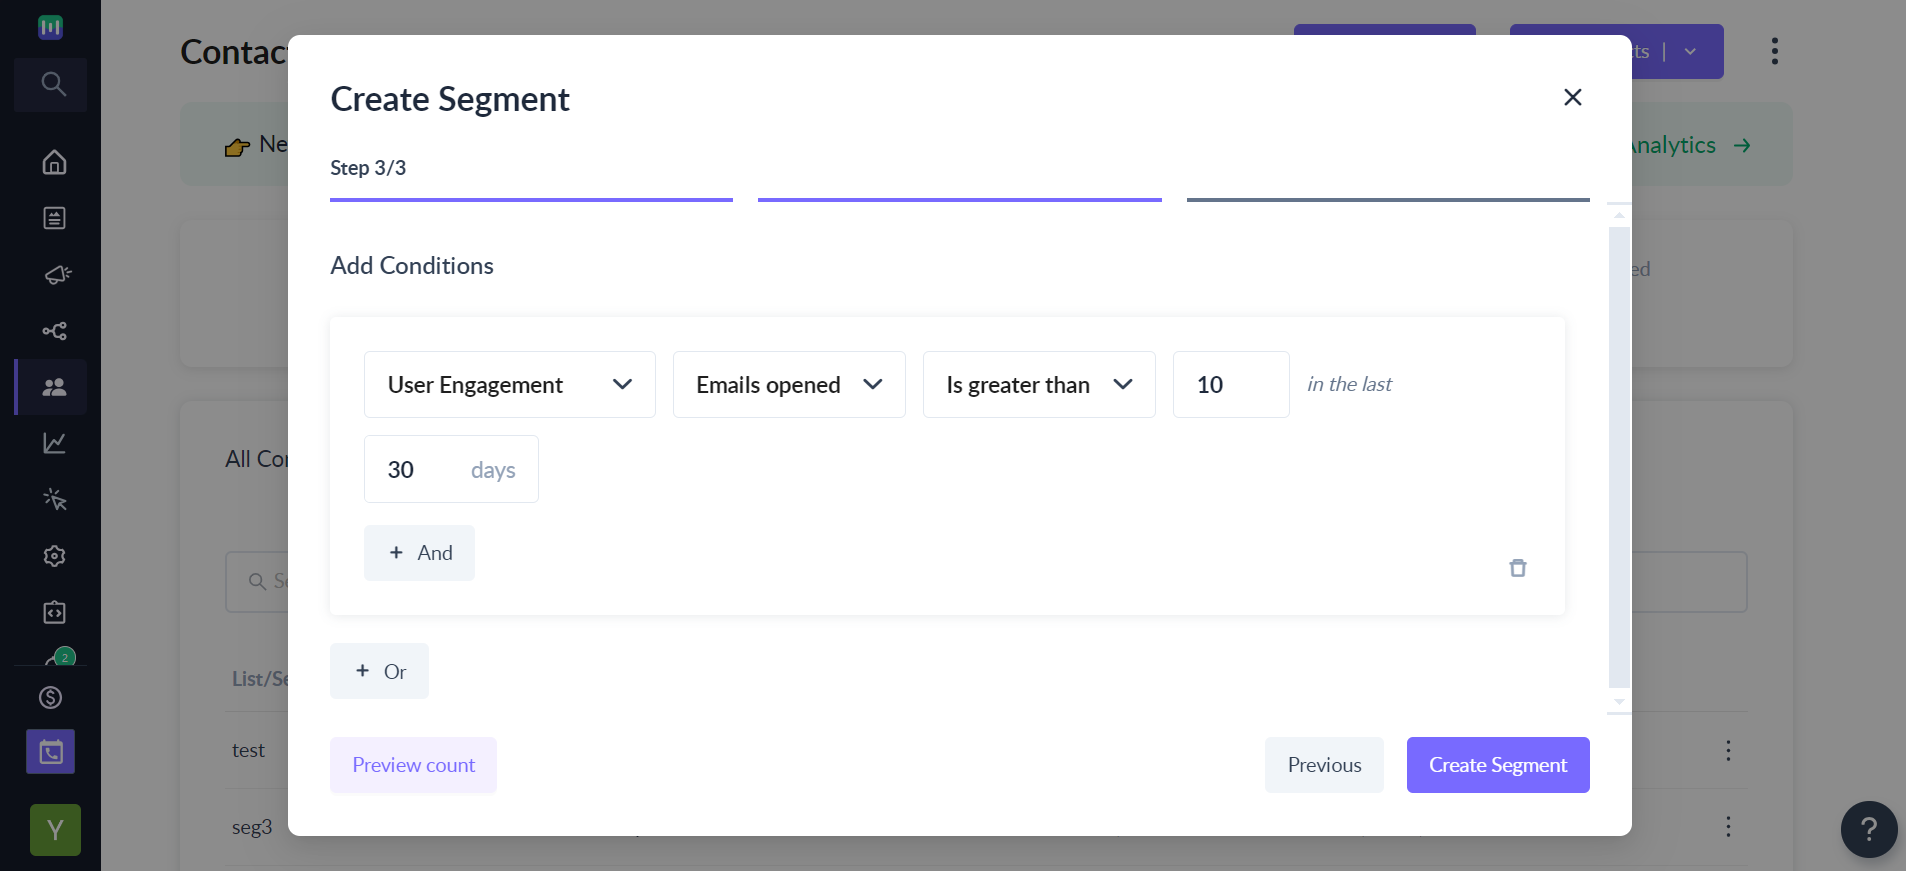 How to segment contacts based on 'User Engagement'?